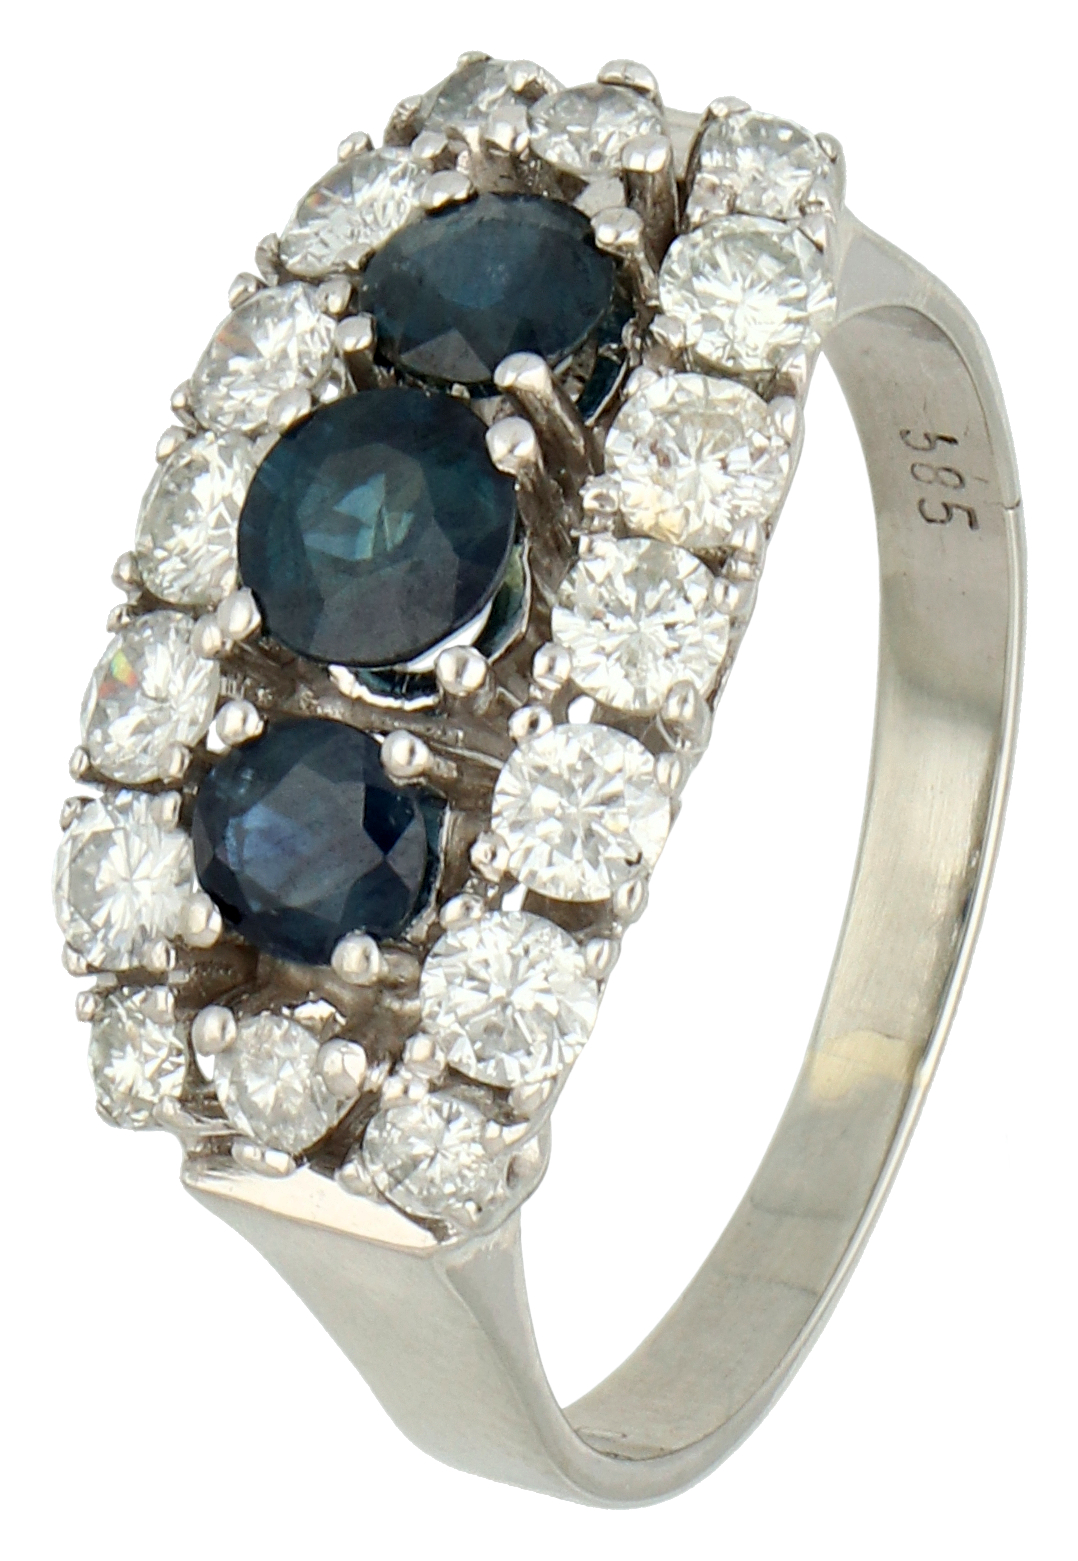 No Reserve - 14K White gold three-stone entourage ring set with approx. 0.83 ct. natural sapphire an